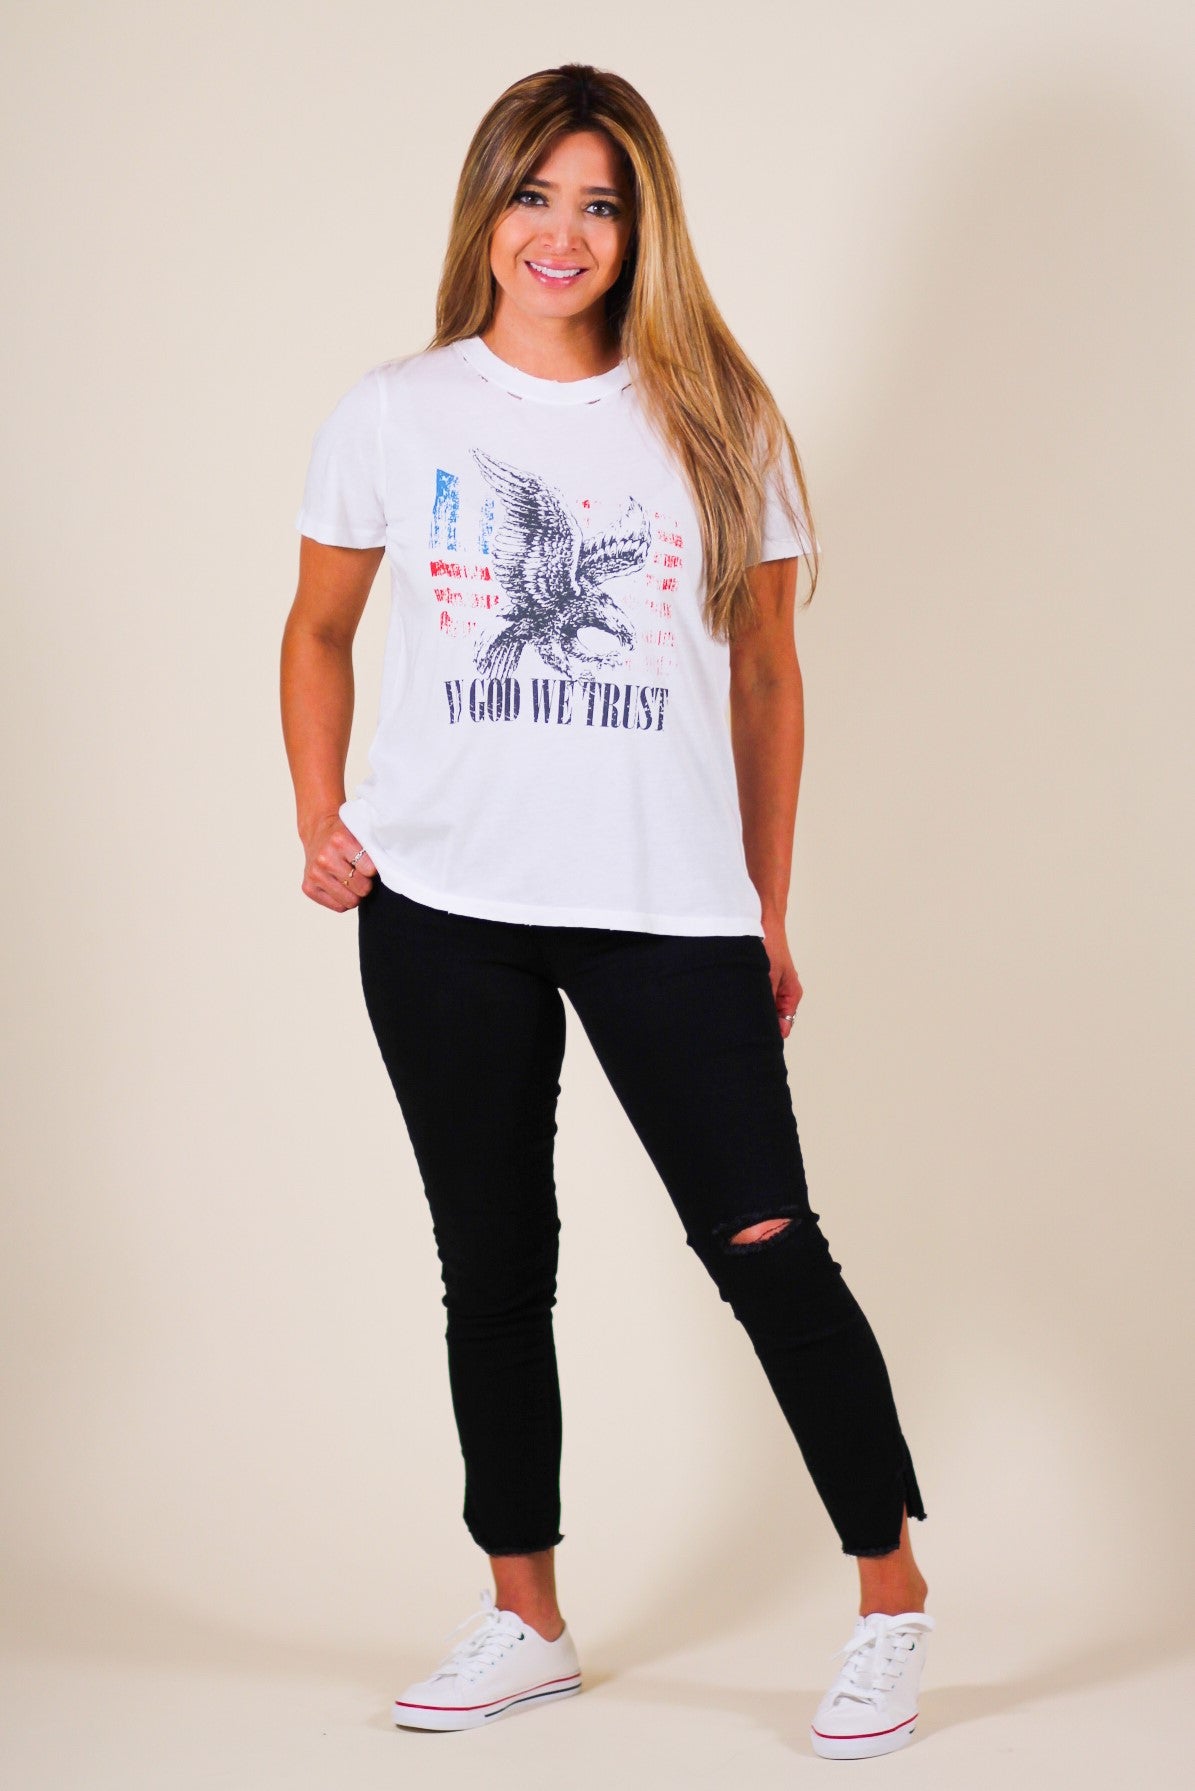 God Bless America Distressed Vintage Graphic Tee